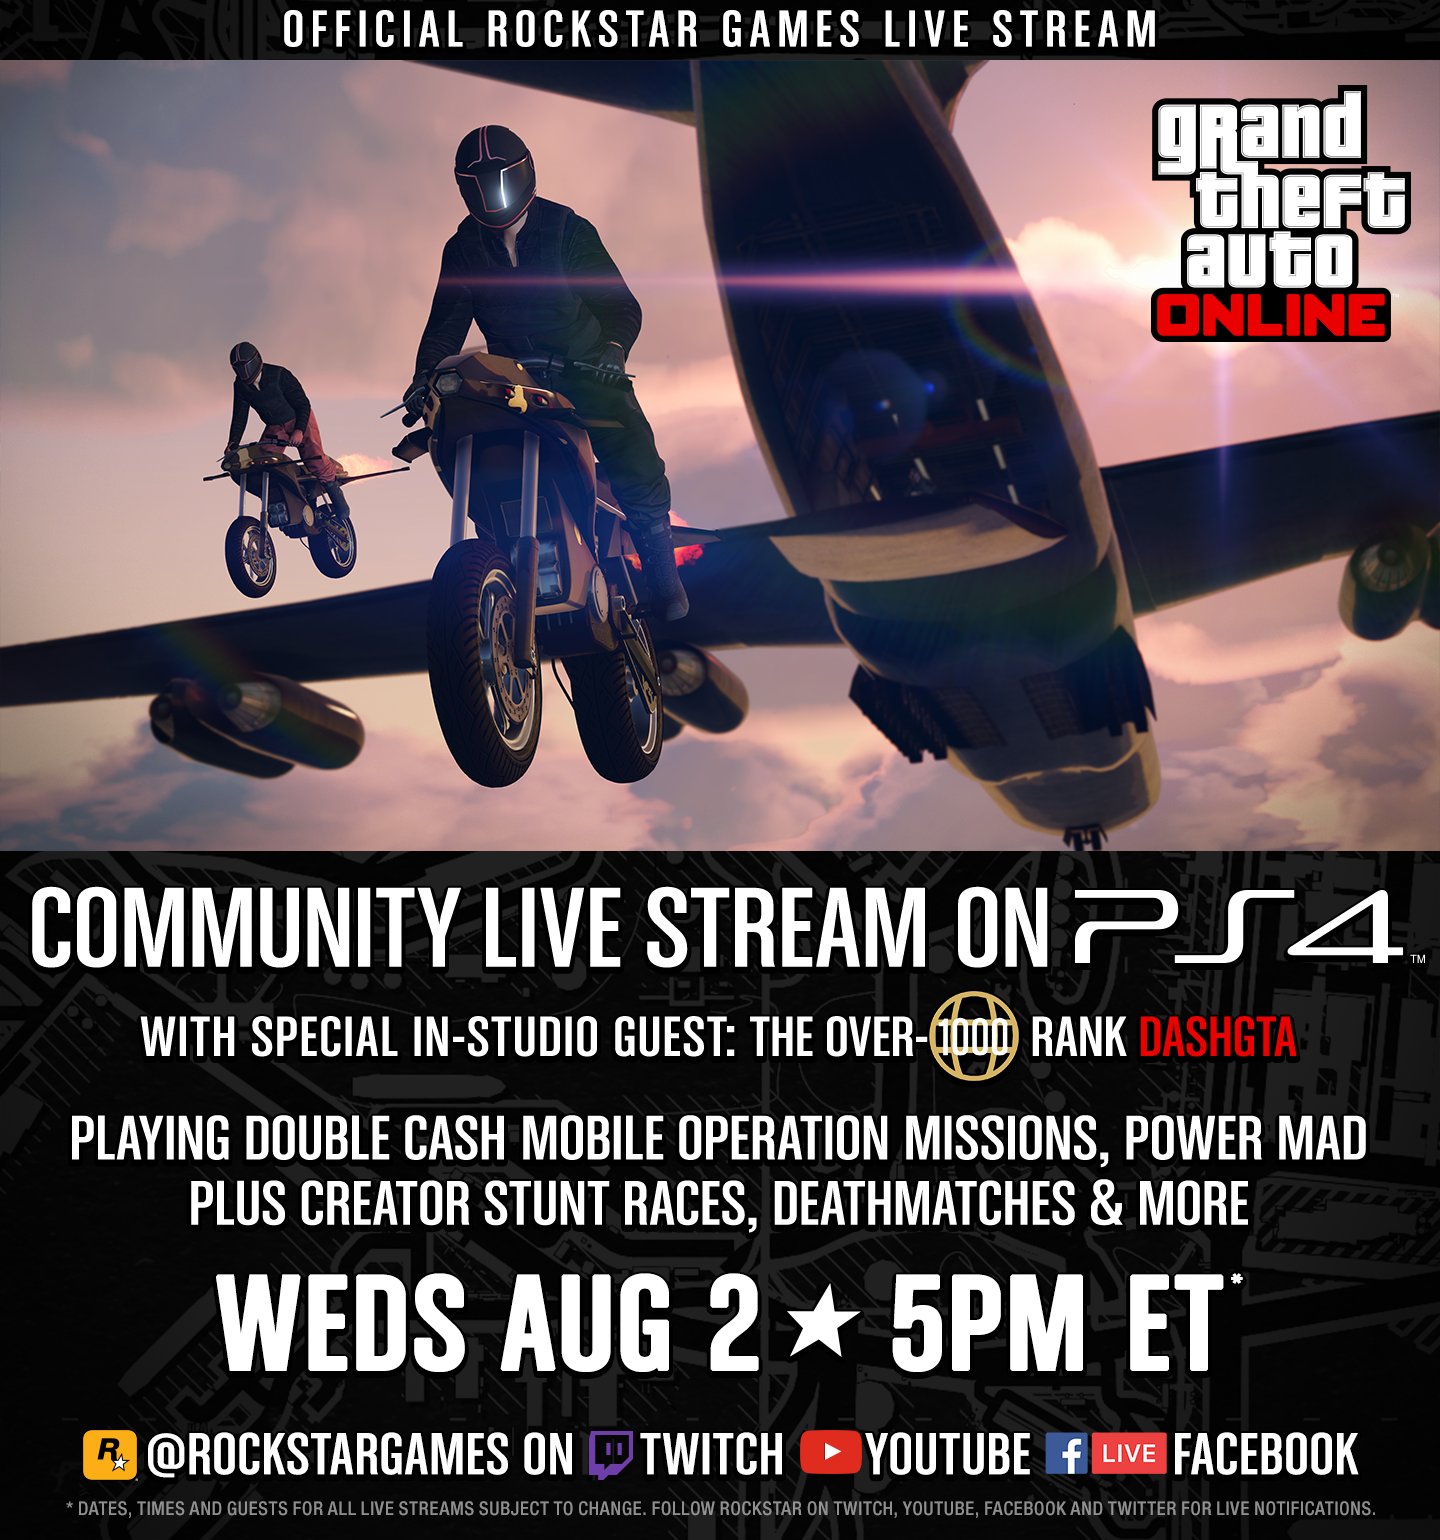 Rockstar Games Gtaonline Community Live Stream Ps4 Tomorrow Weds Aug 2 5pm Eastern With Special In Studio Guest The Over 1000 Rank Legend Dash Gta T Co Iutifhq1l1 Twitter